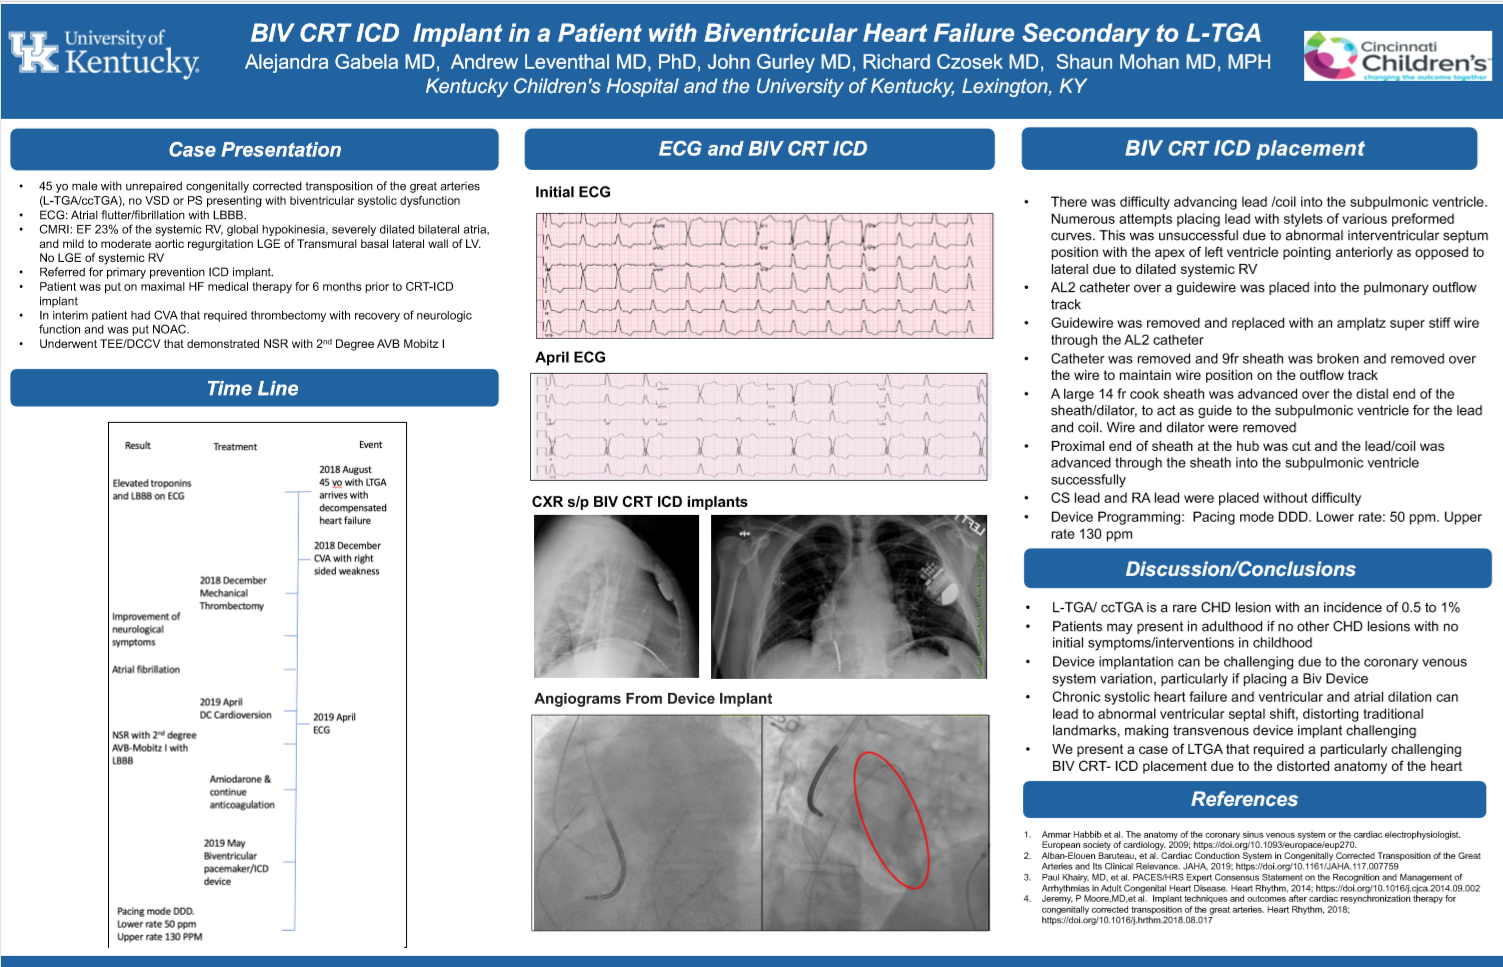 BIC CRT ICD Implant in a patient with Biventricular Heart Failure Secondary to L-TGA, by Alejandra Gabela MD, Andrew Leventhal MD, PhD, John Gruley MD, Richard Czosek MD, Shaun Mohan MD, MPH 